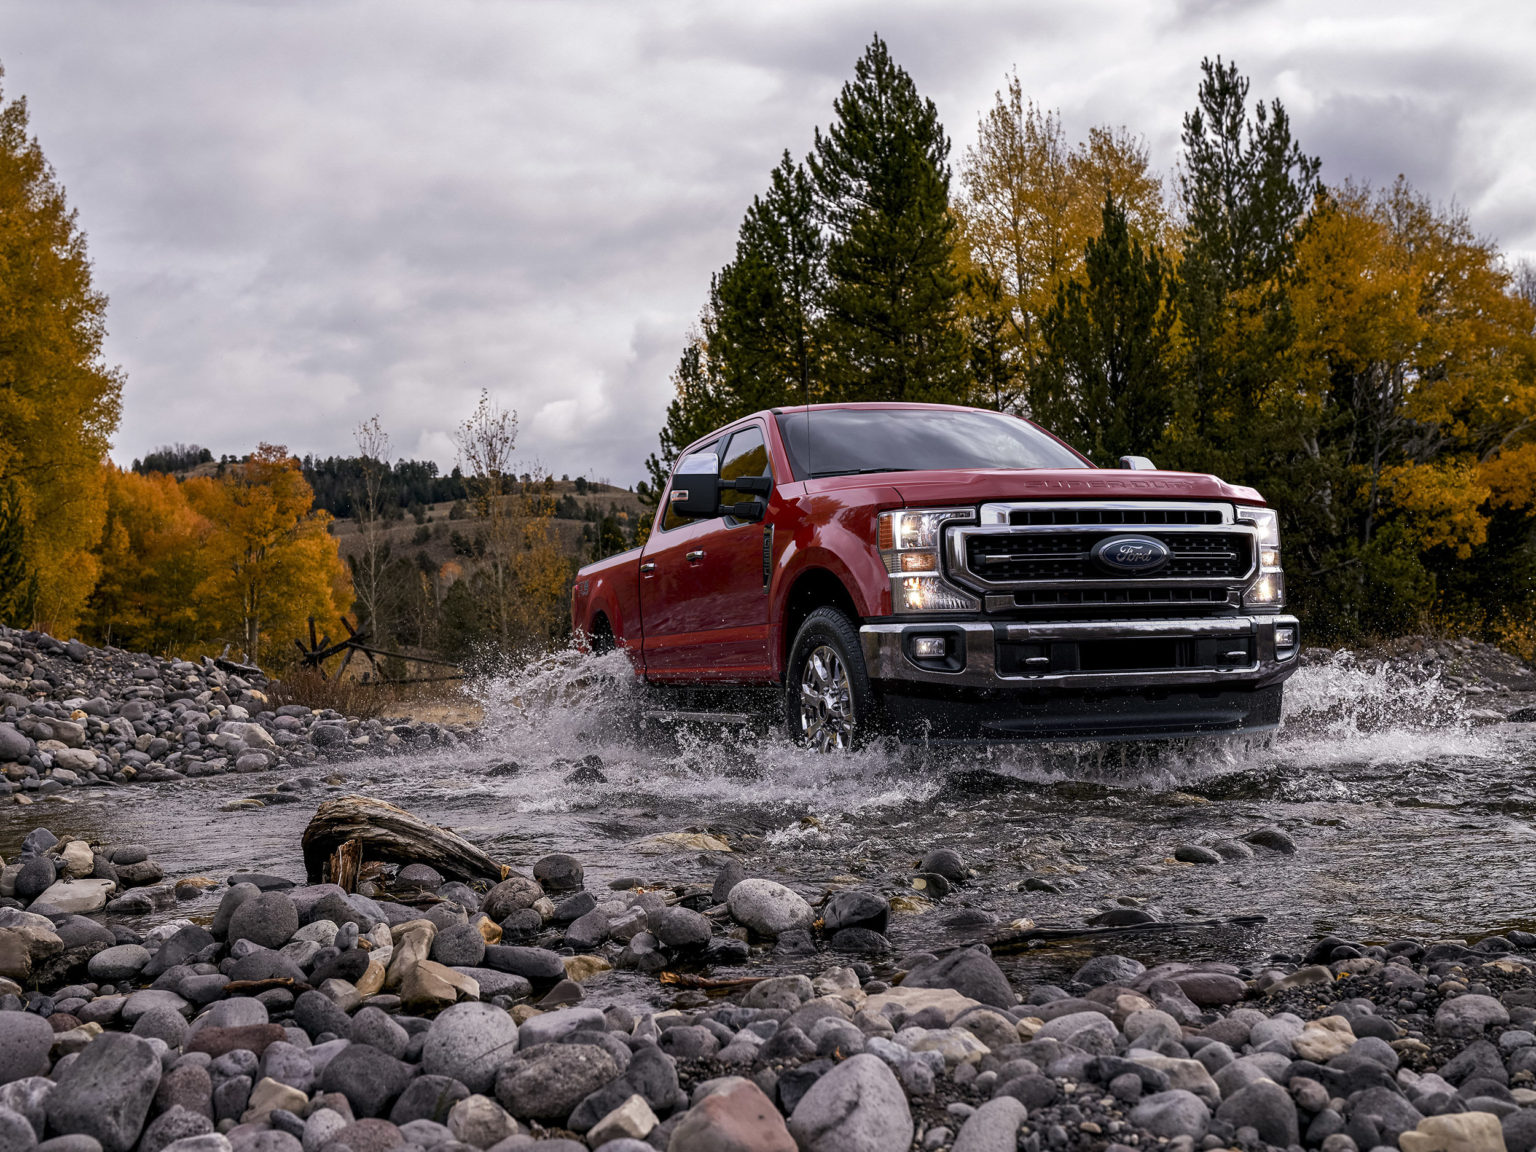 The 2020 Ford Super Duty has captured this year's Truck Trend Pickup Truck of the Year title.